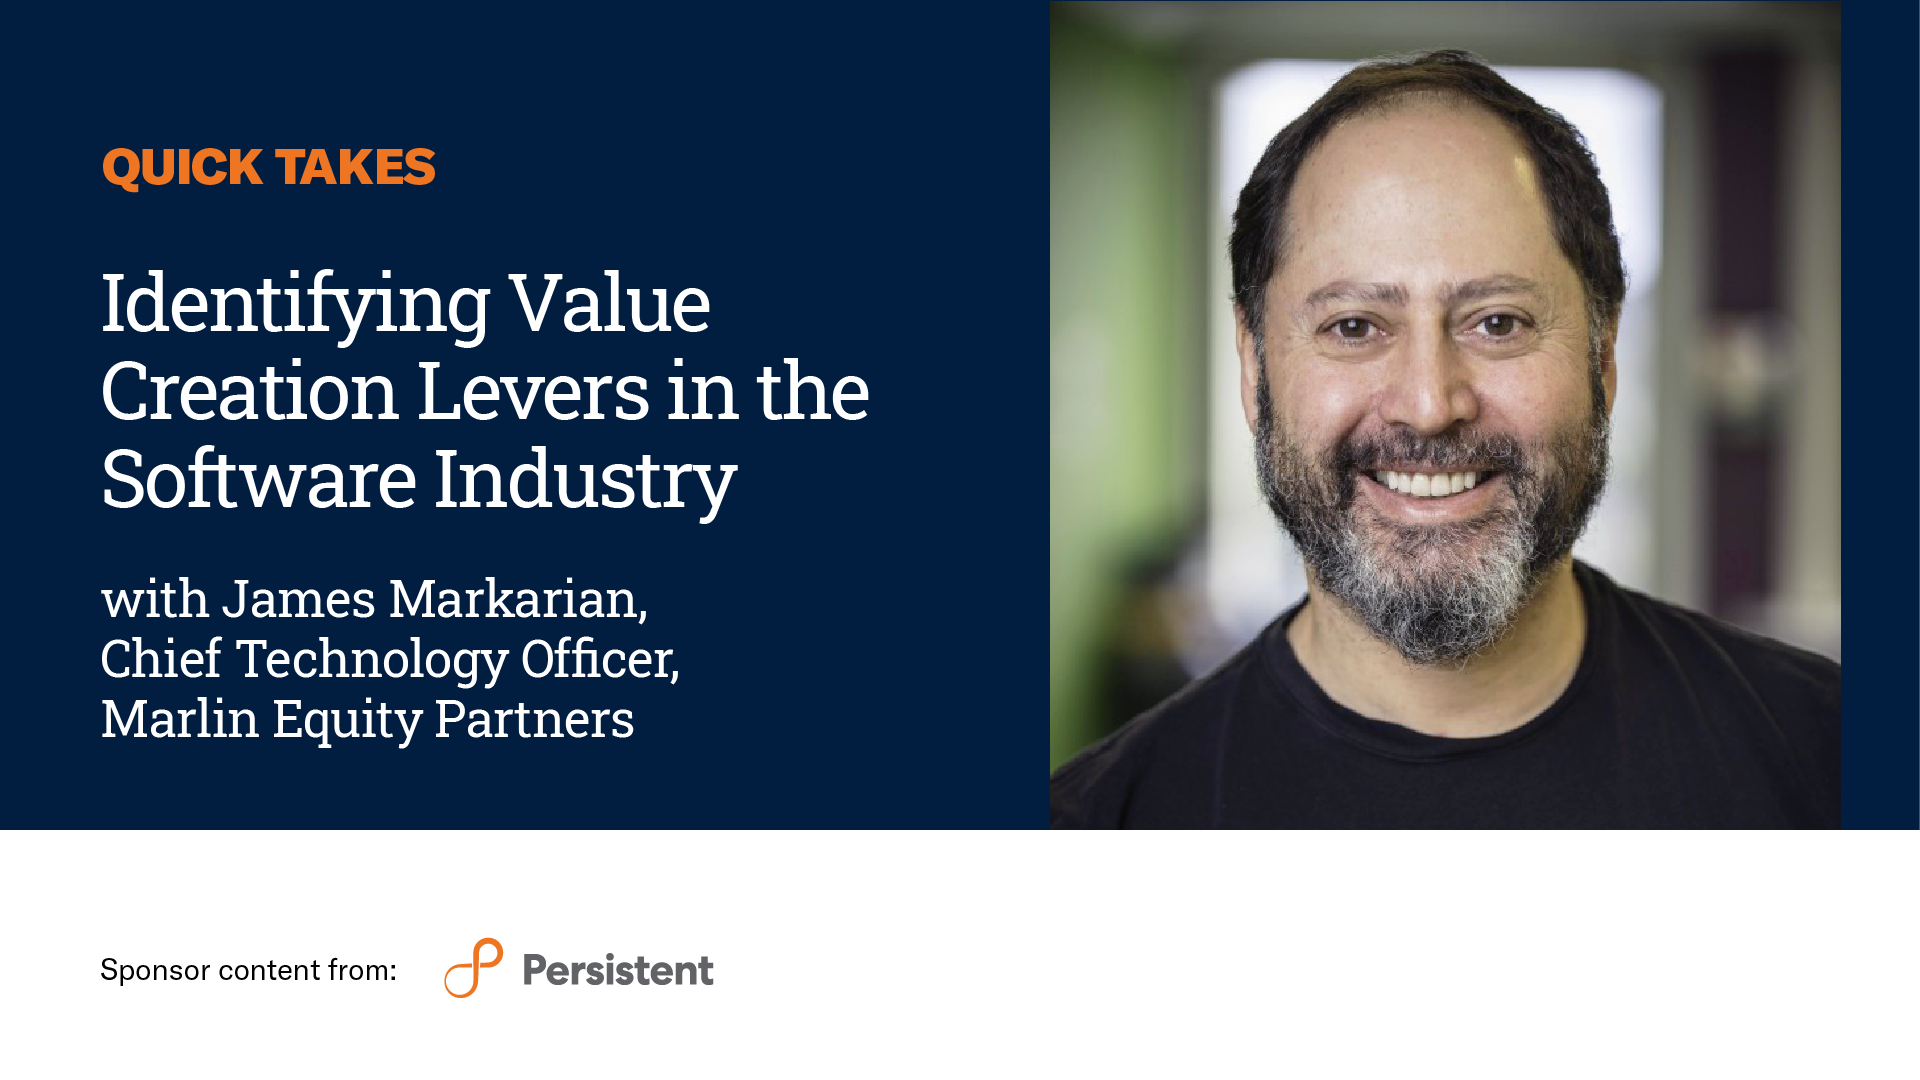 Video Rapidly Snatch: James Markarian on Figuring out Value Creation Levers in the Machine Alternate